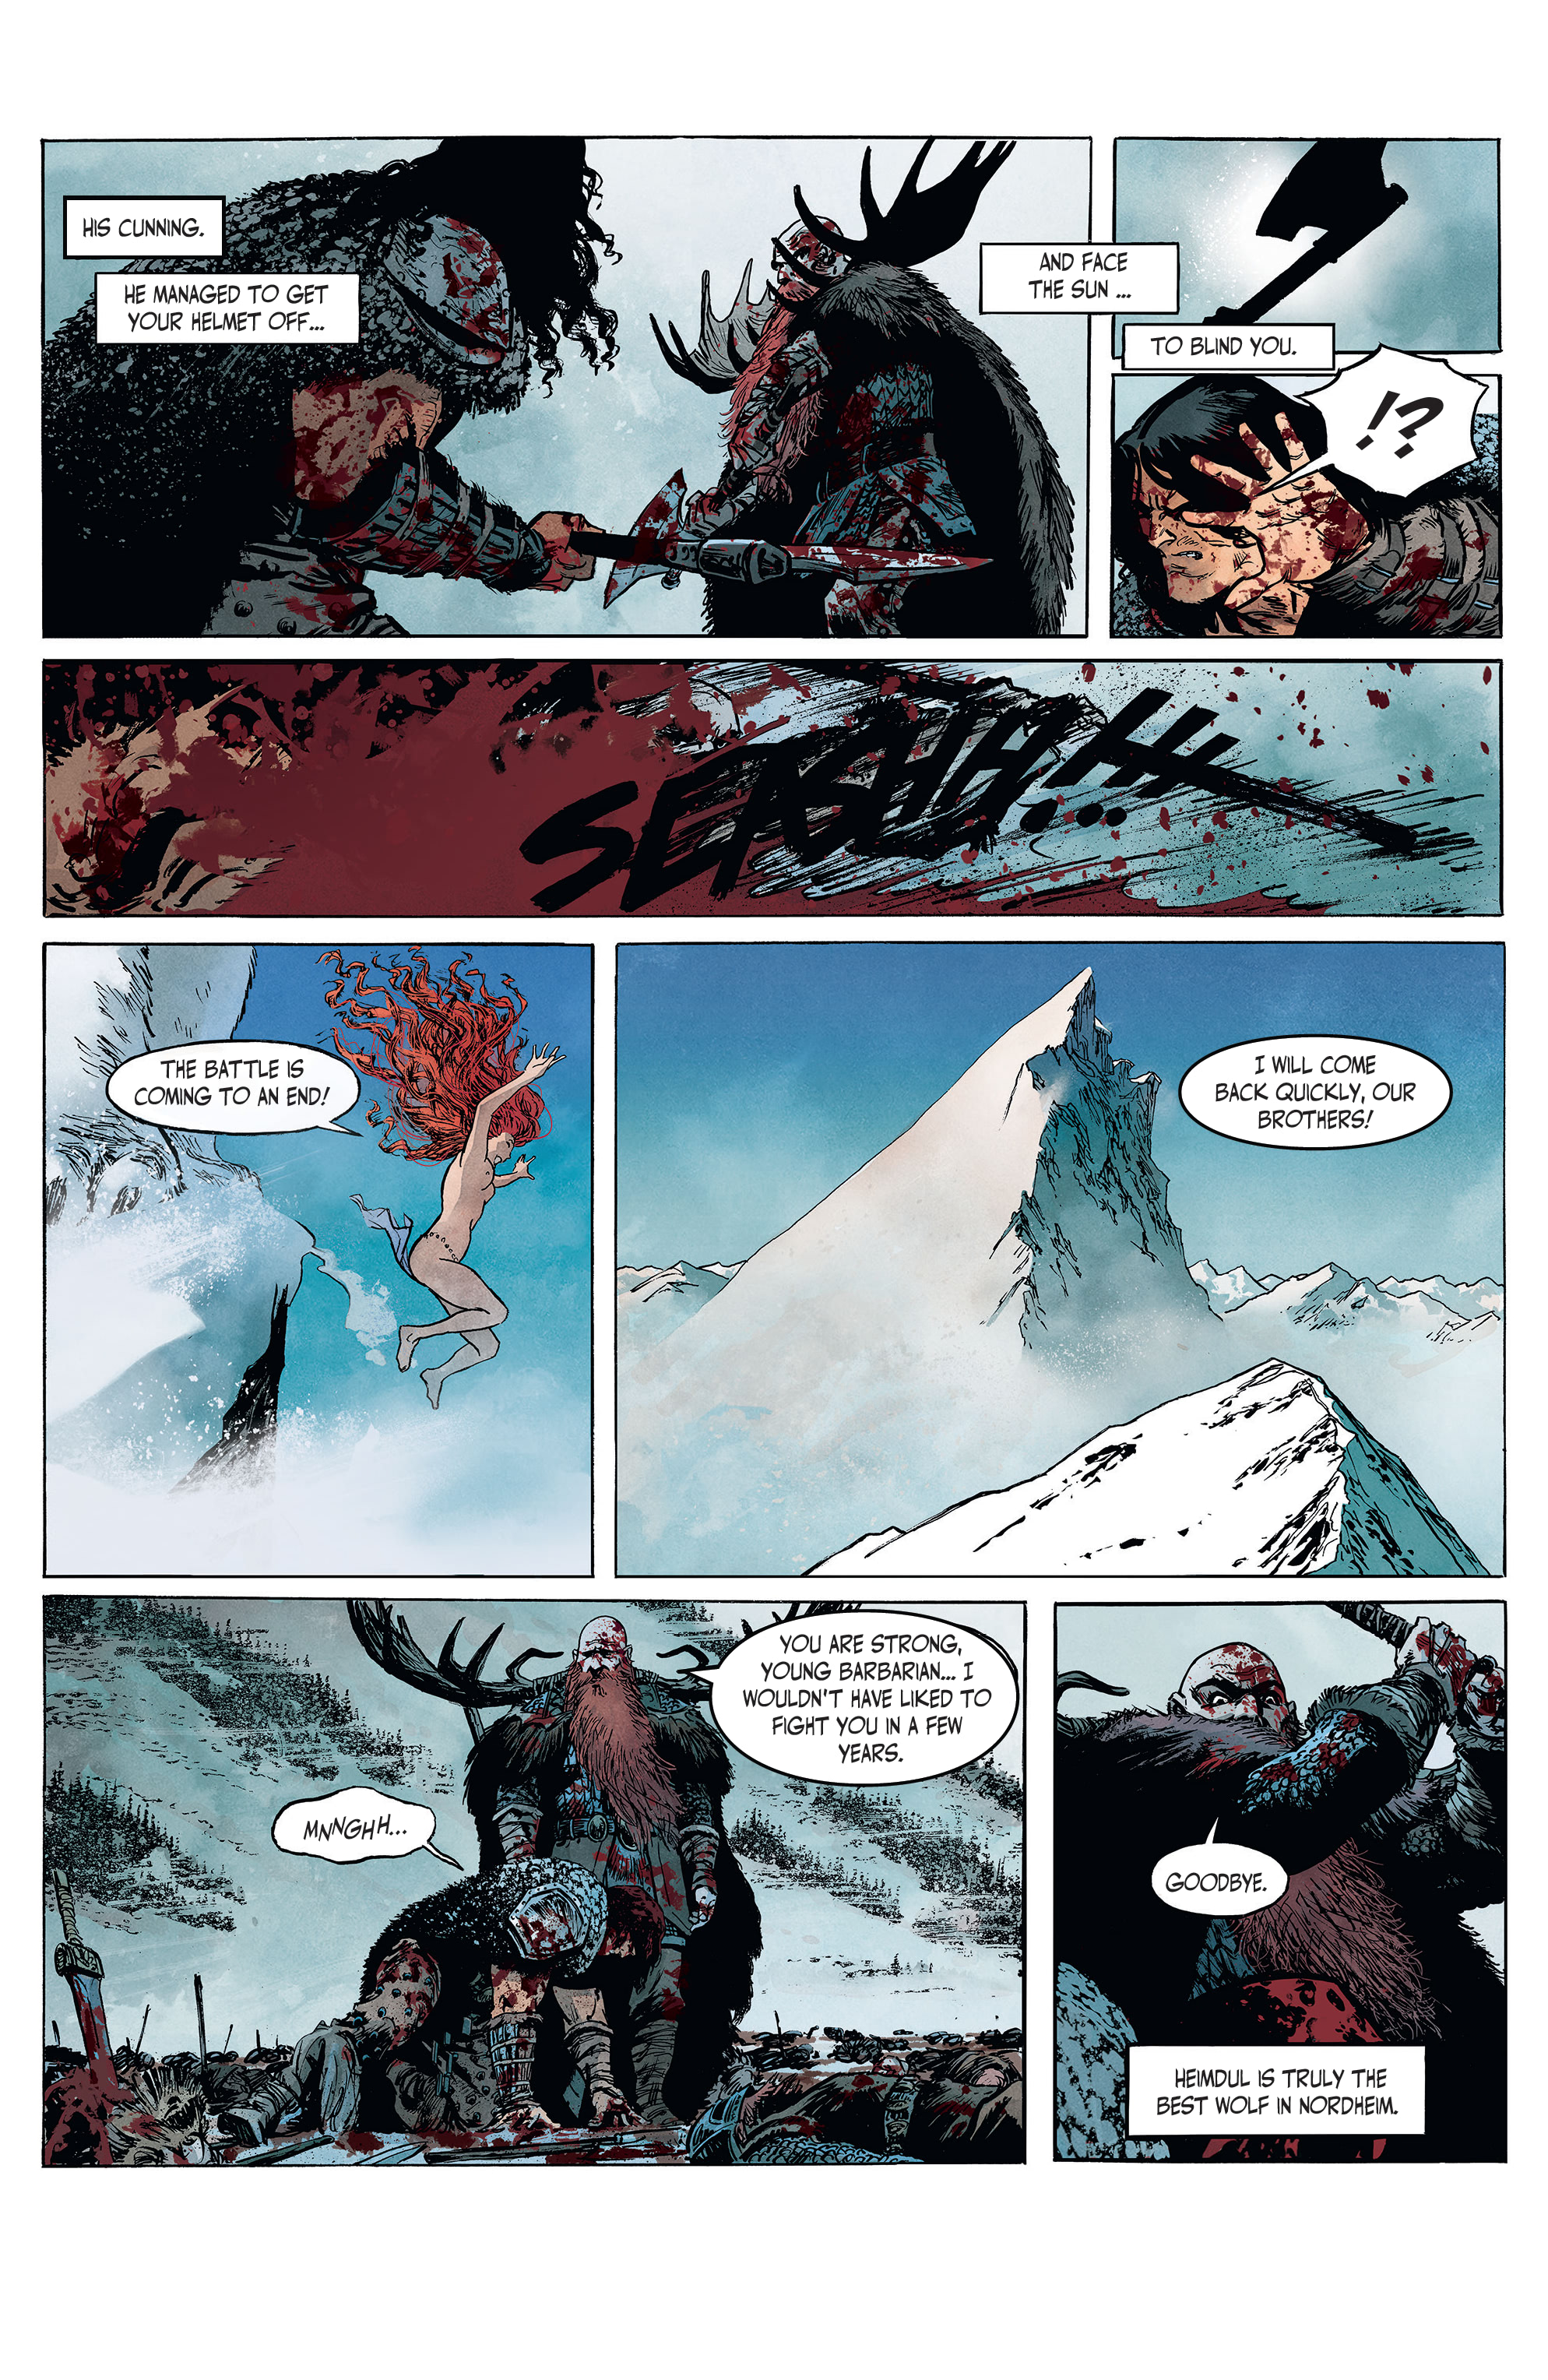 The Cimmerian: The Frost-Giant's Daughter (2020-): Chapter 2 - Page 3